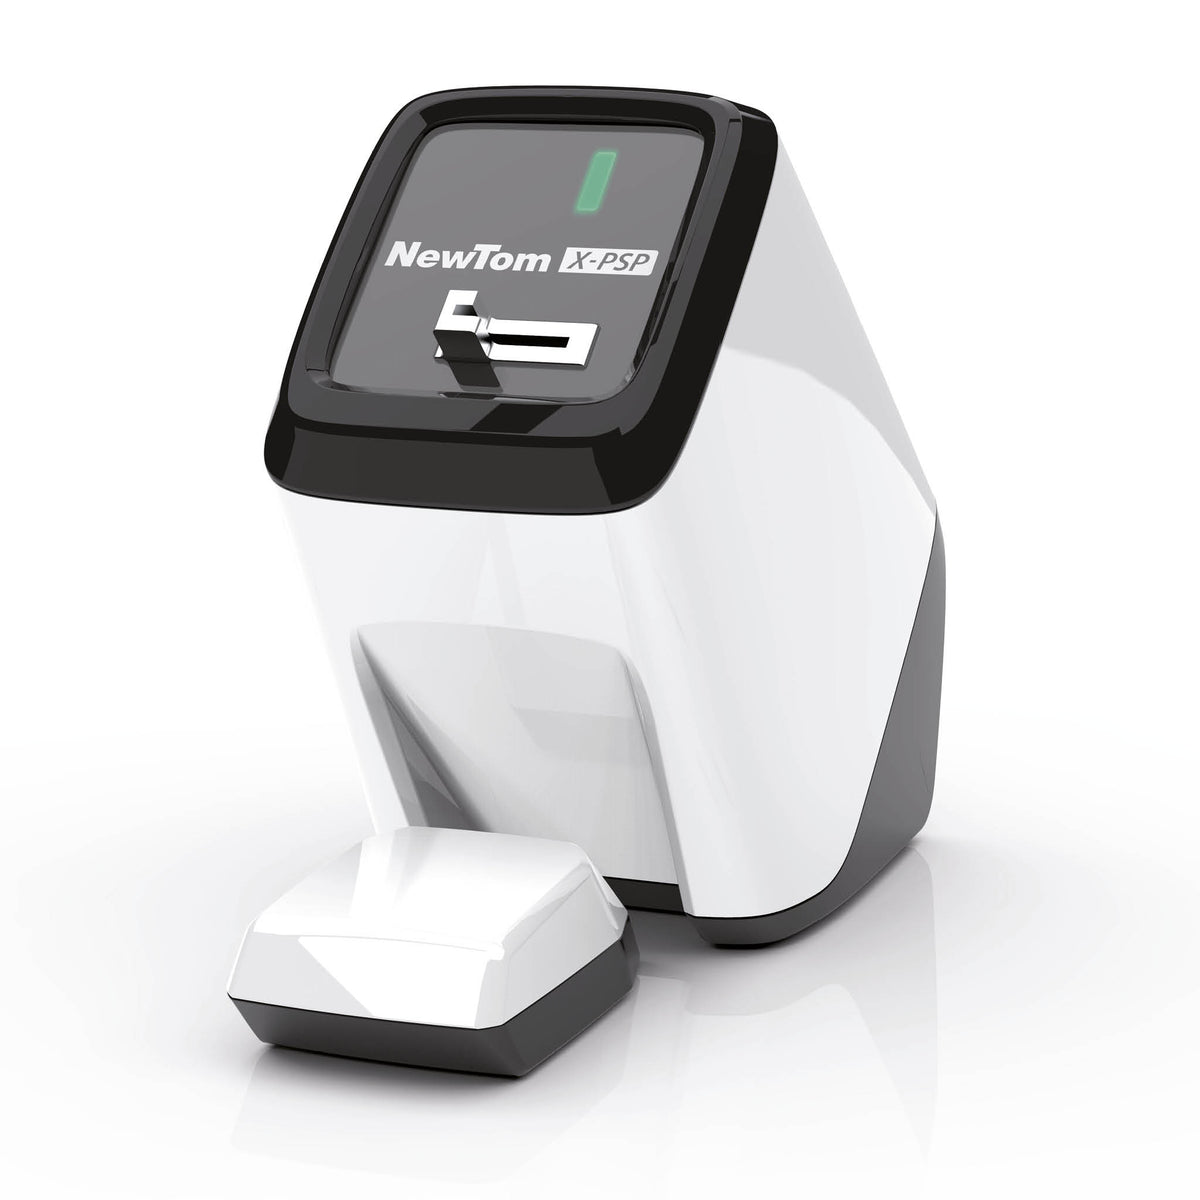 NewTom X-PSP Scanner Dental Diagnostic Scanner is a computed radiography system that combines advanced digital diagnostic technology with advantage of trad film plates.